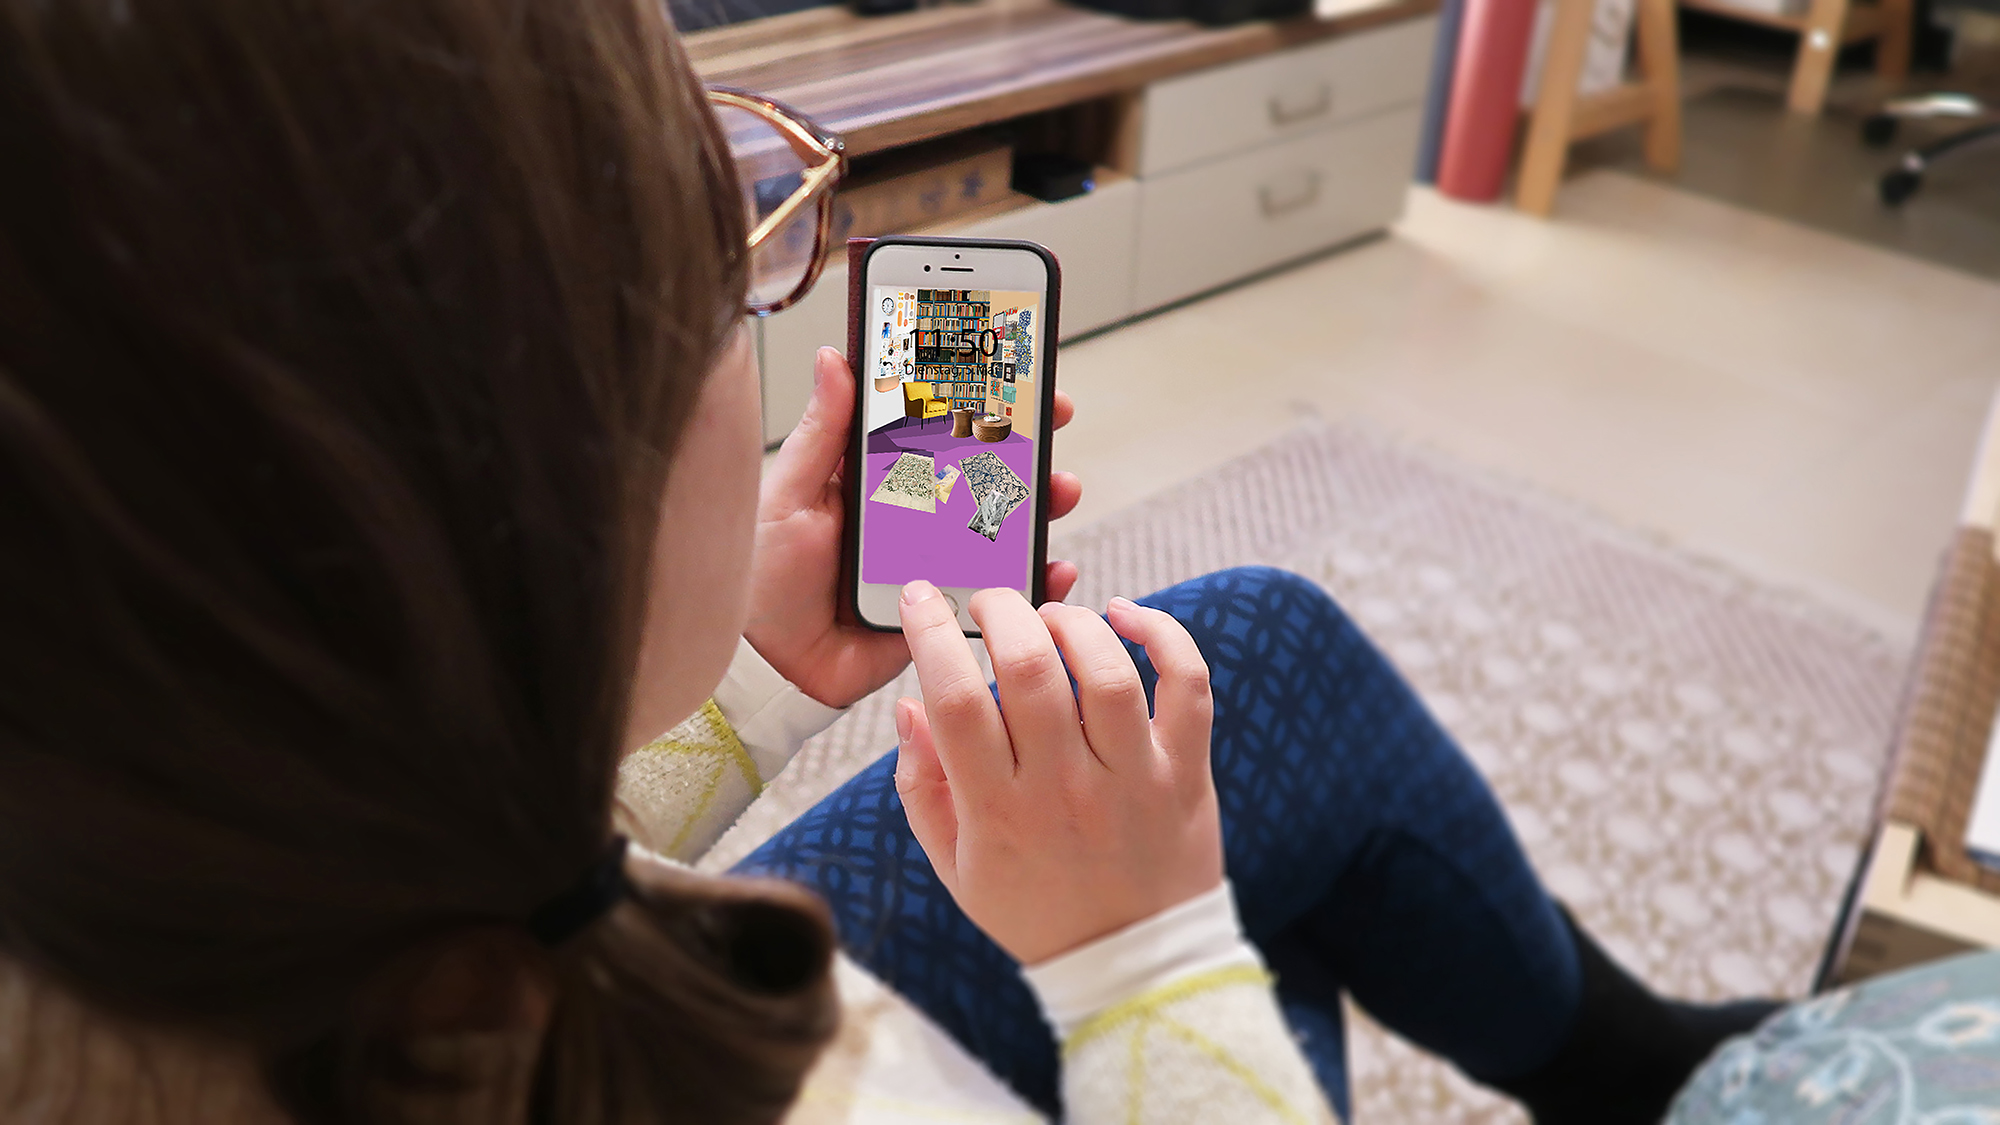 A person sitting in a room is holding a smartphone in their hand displaying a self-created collage of a room on its home screen.